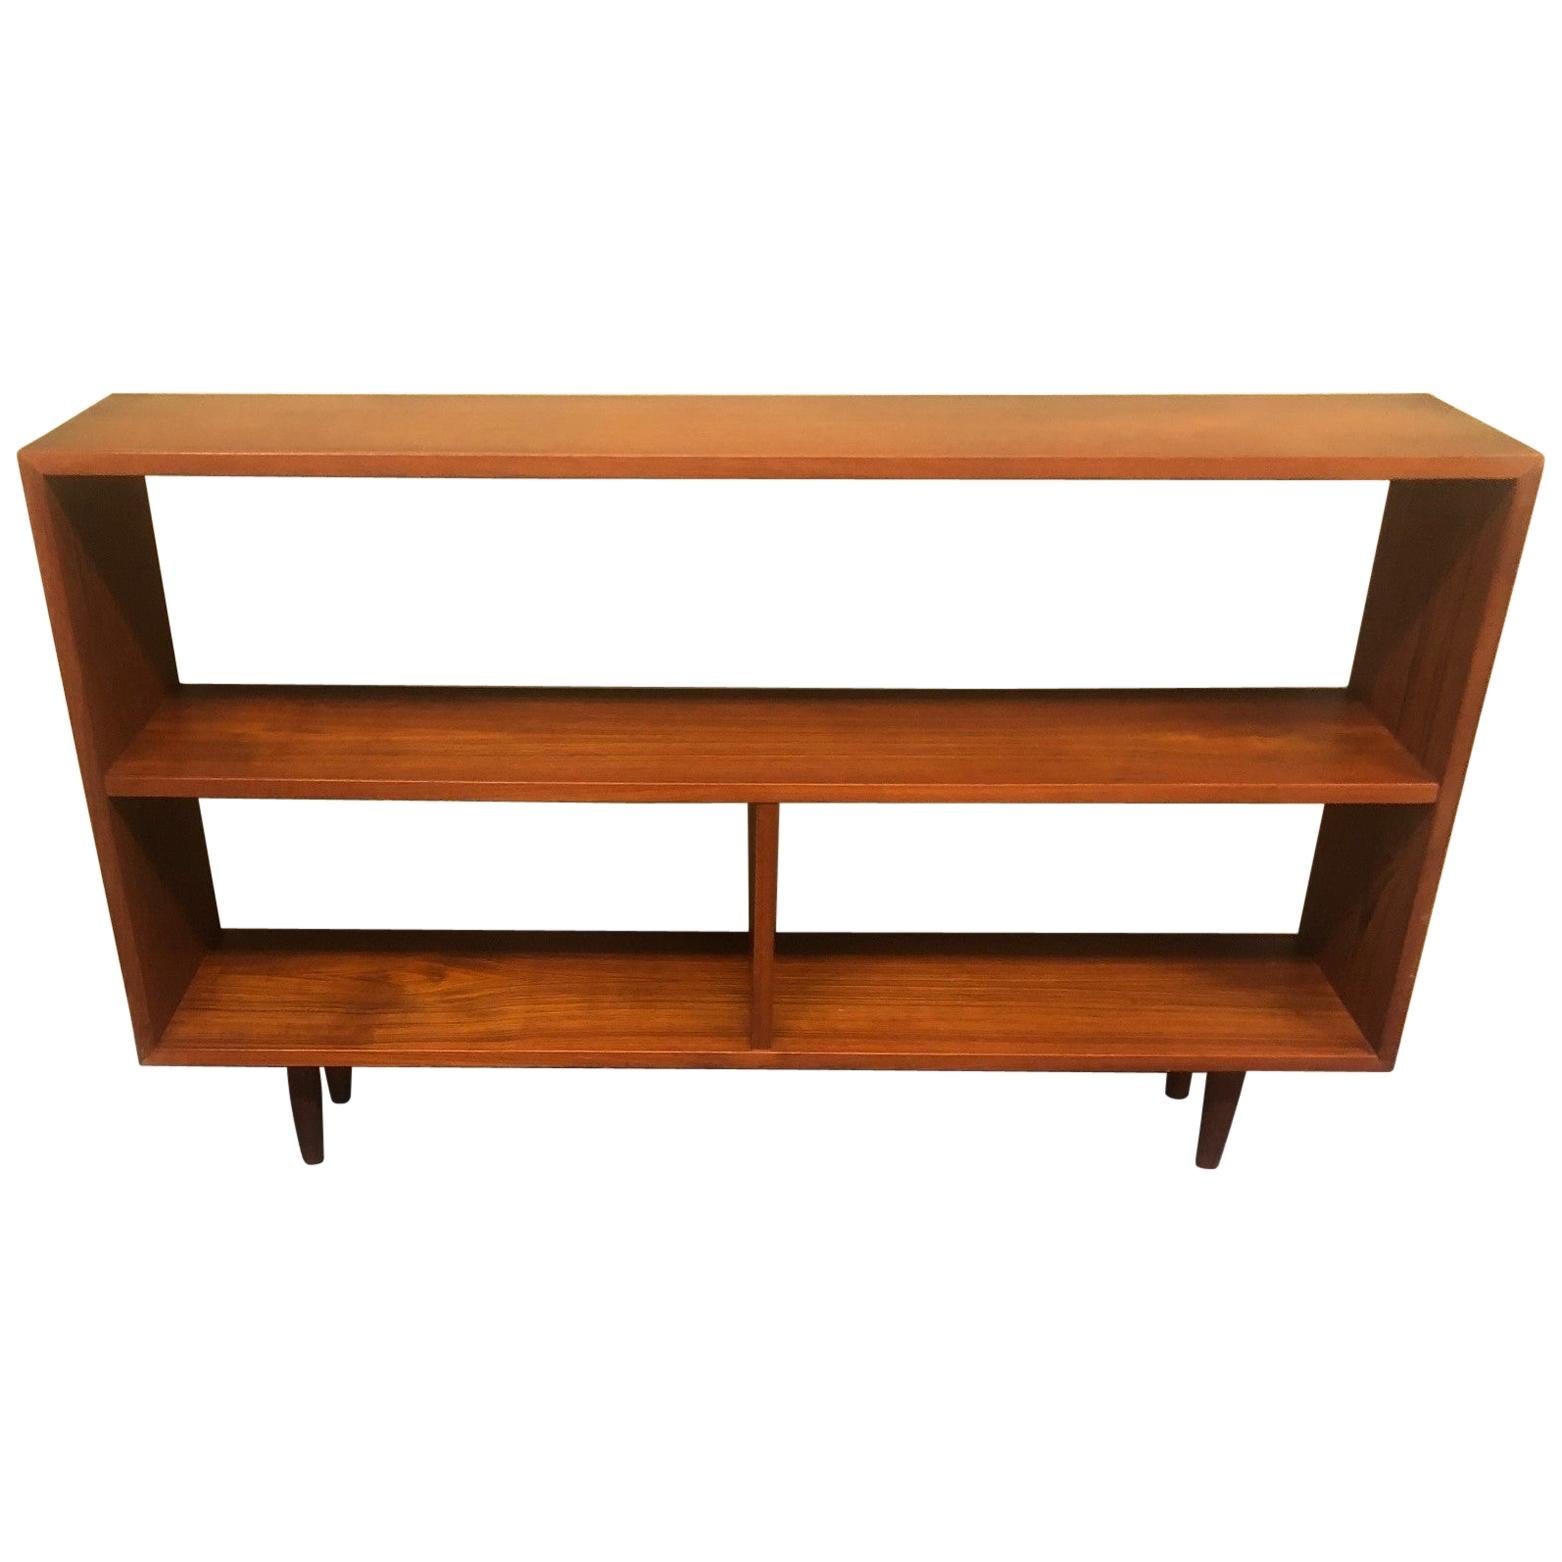 Mid-Century Modern Backless Low Profile Teak Bookcase with Tapered Legs